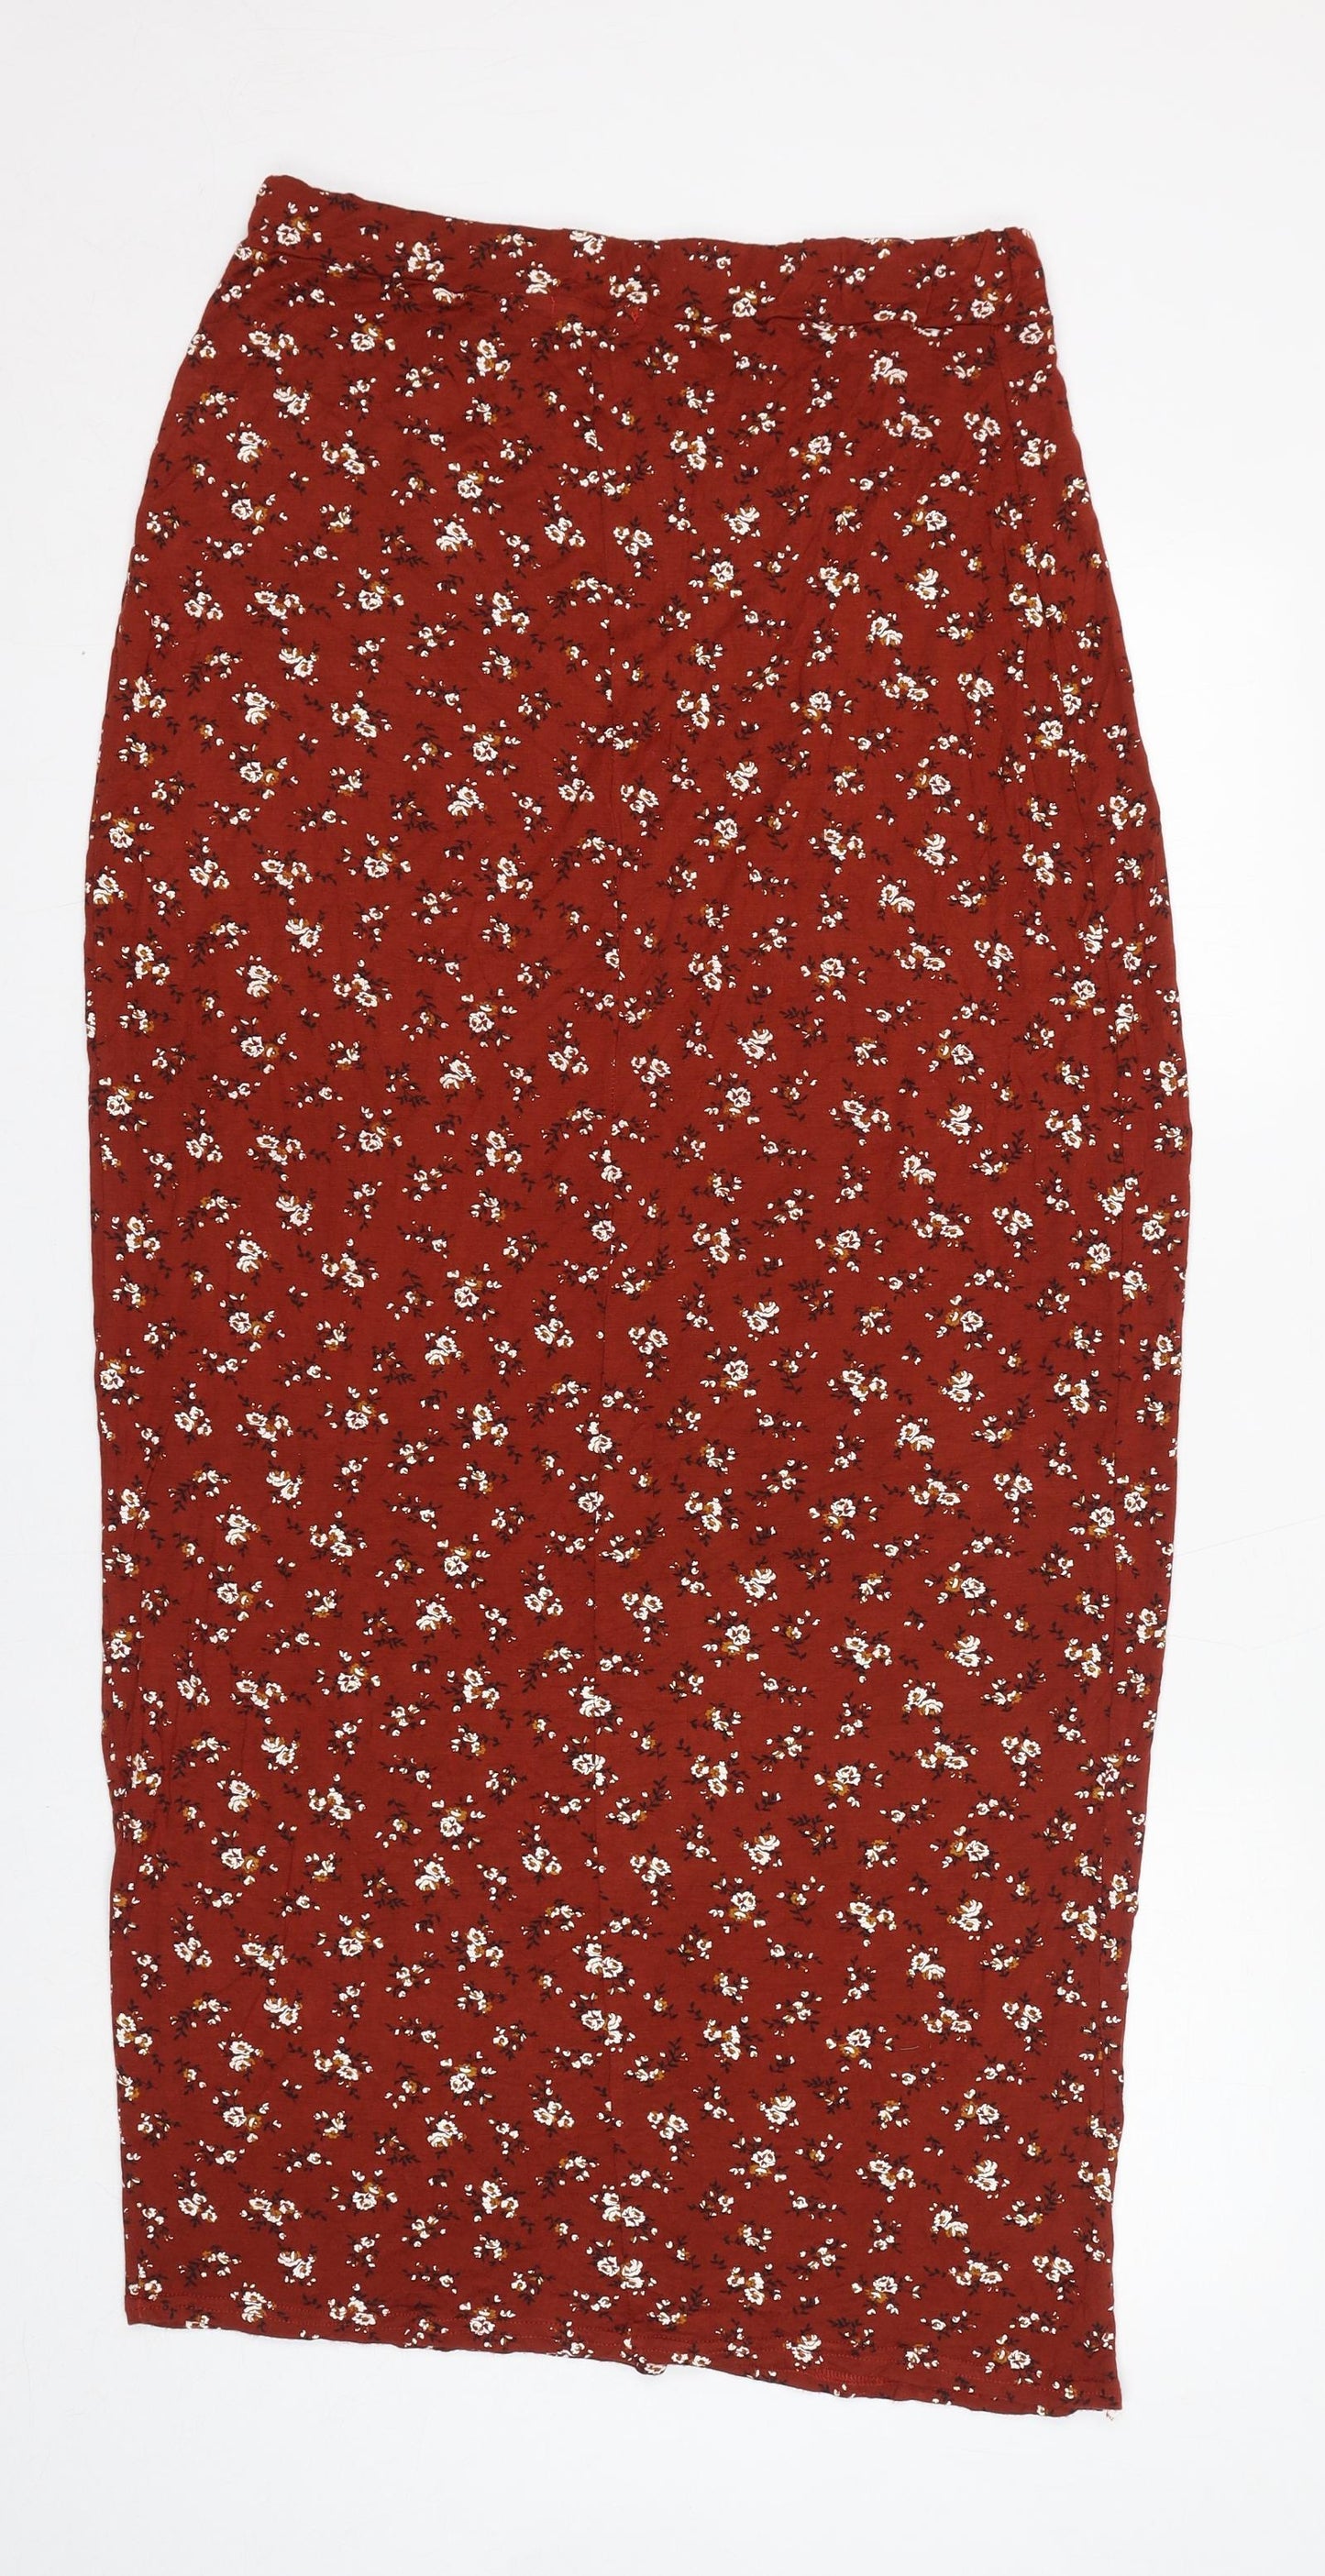 Boohoo Womens Brown Floral Viscose A-Line Skirt Size 14